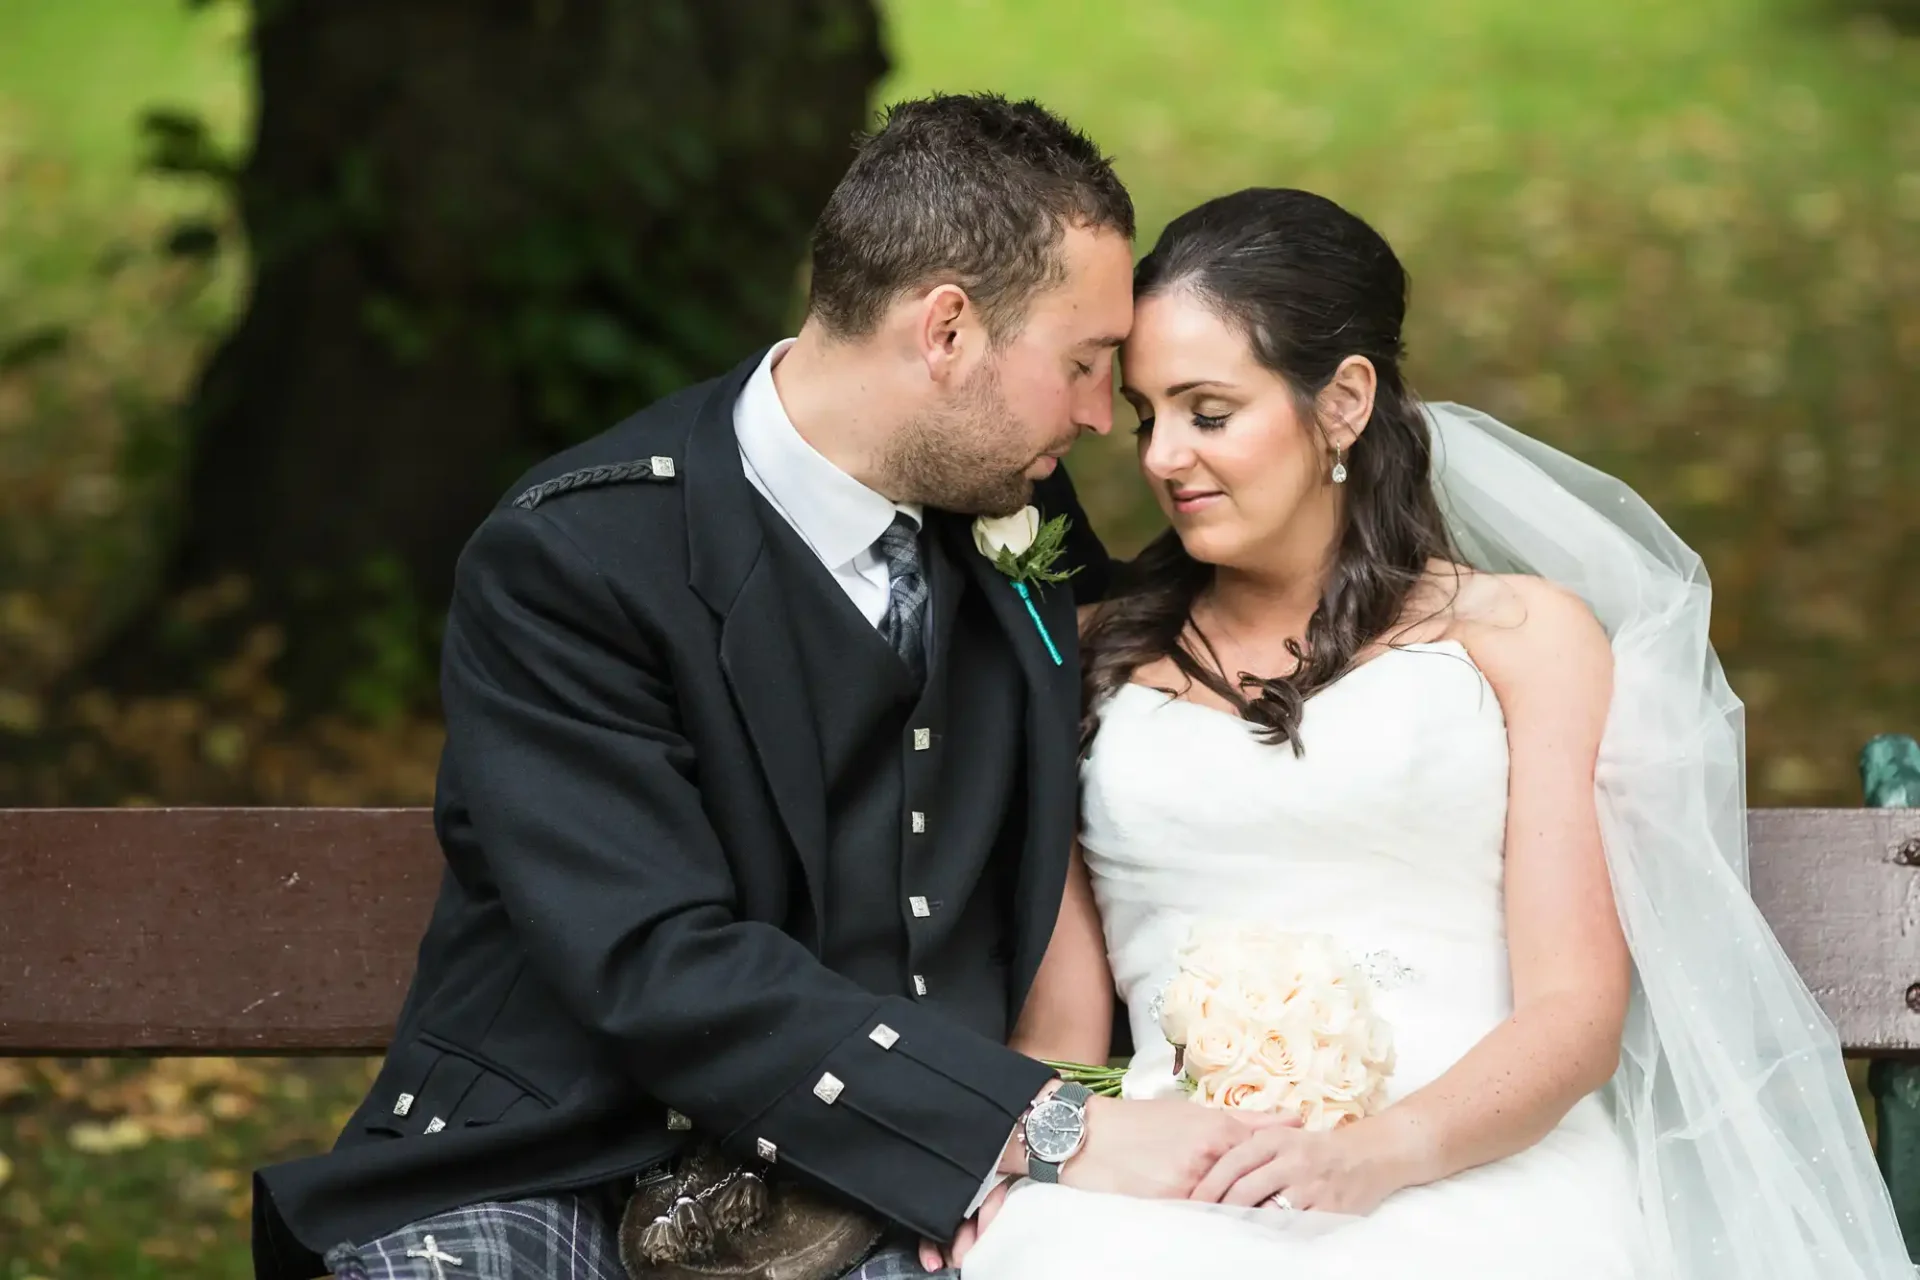 A bride in a white dress and a groom in a kilt share an intimate moment on a park bench, surrounded by greenery.